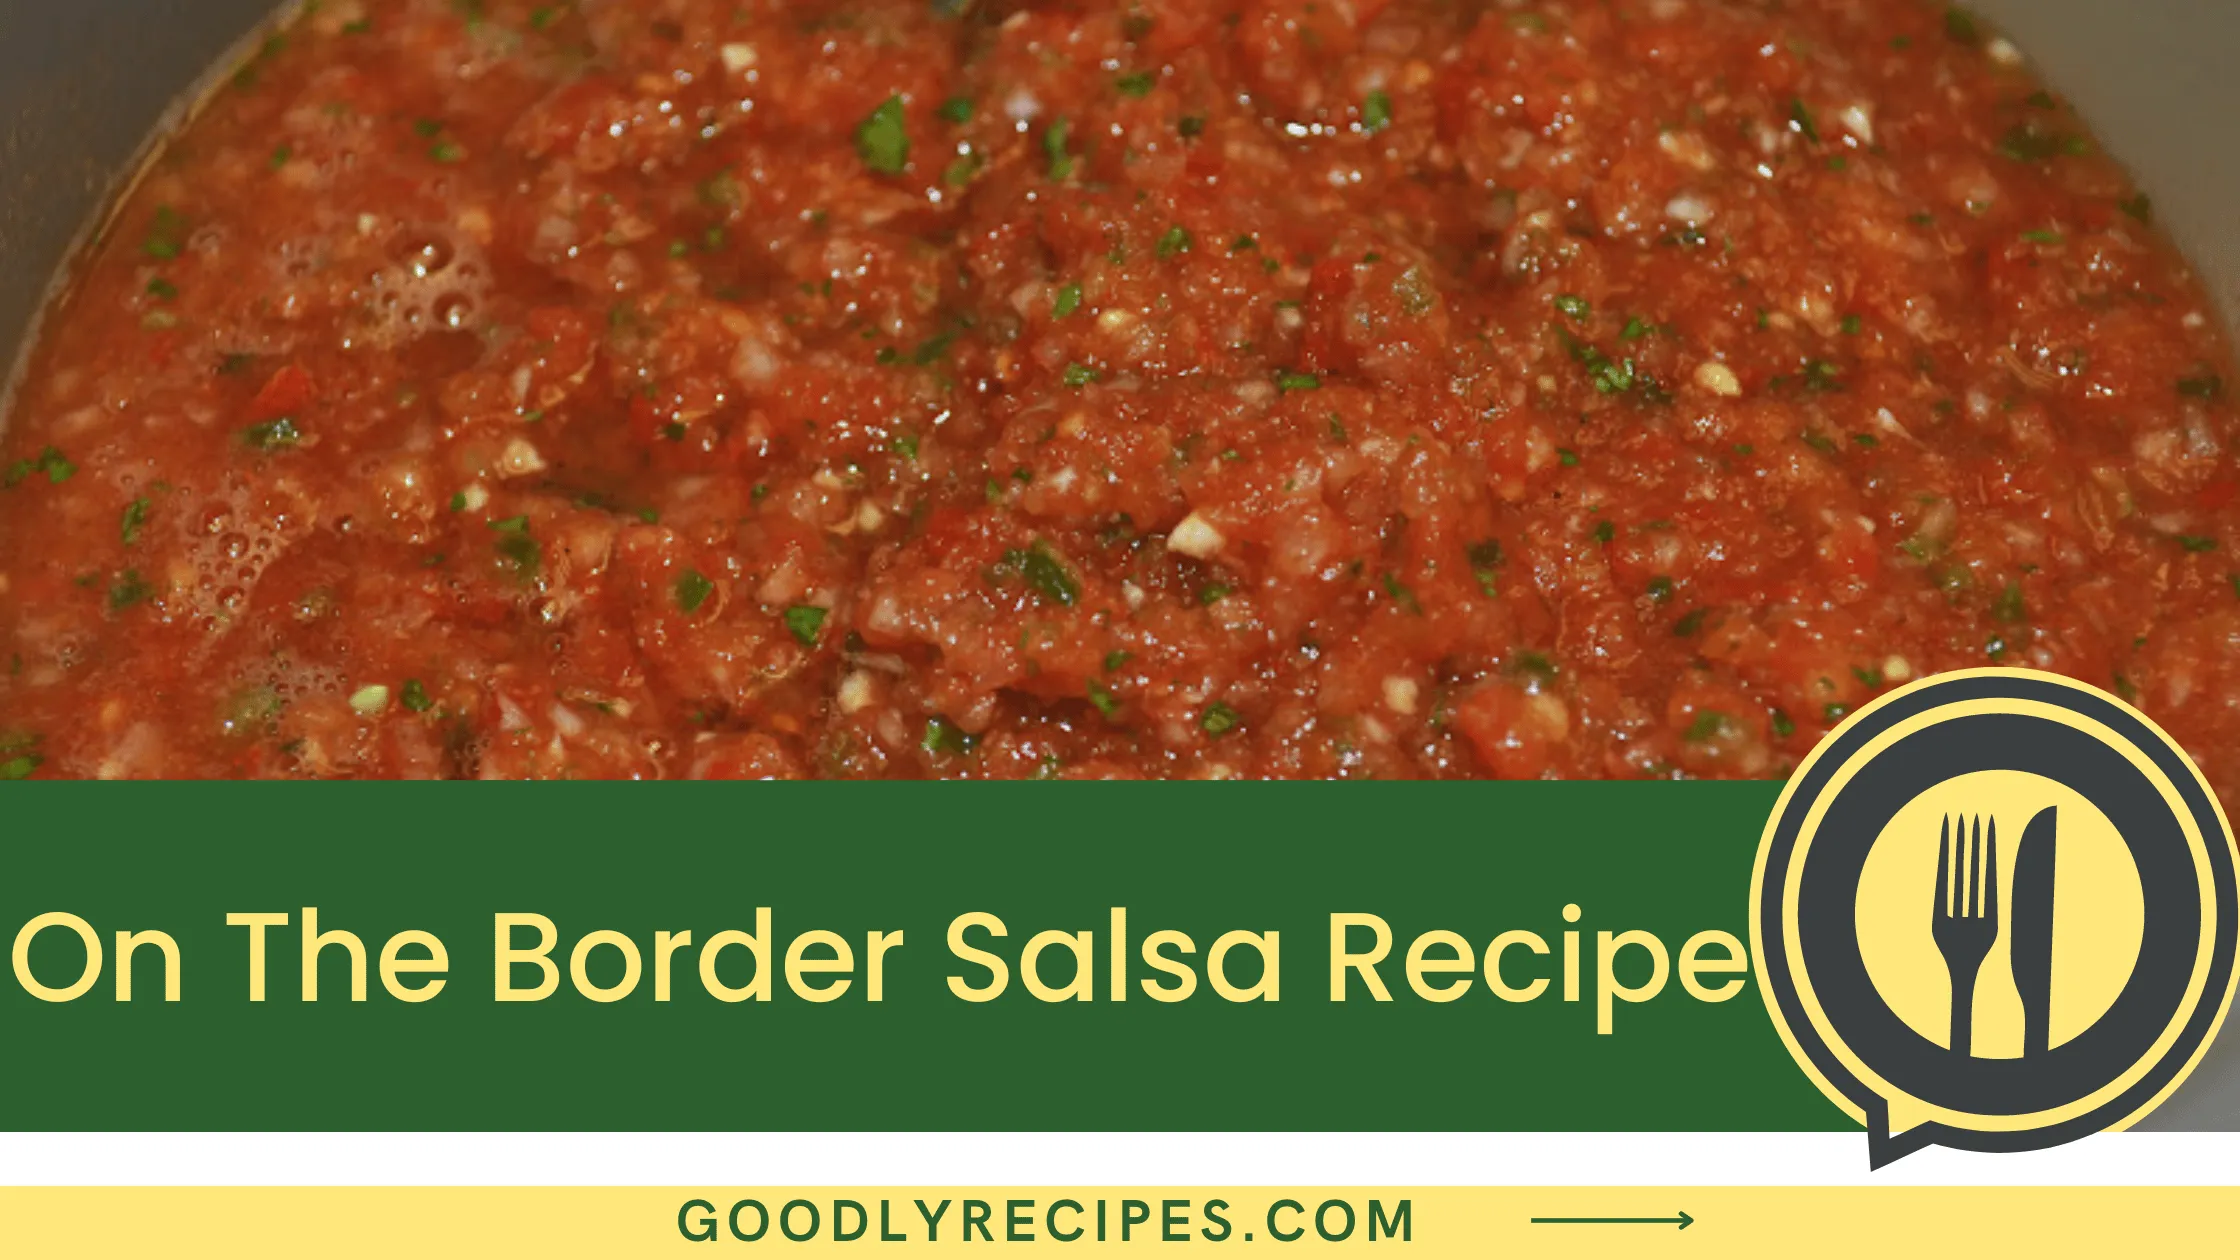 What Is On The Border Salsa?